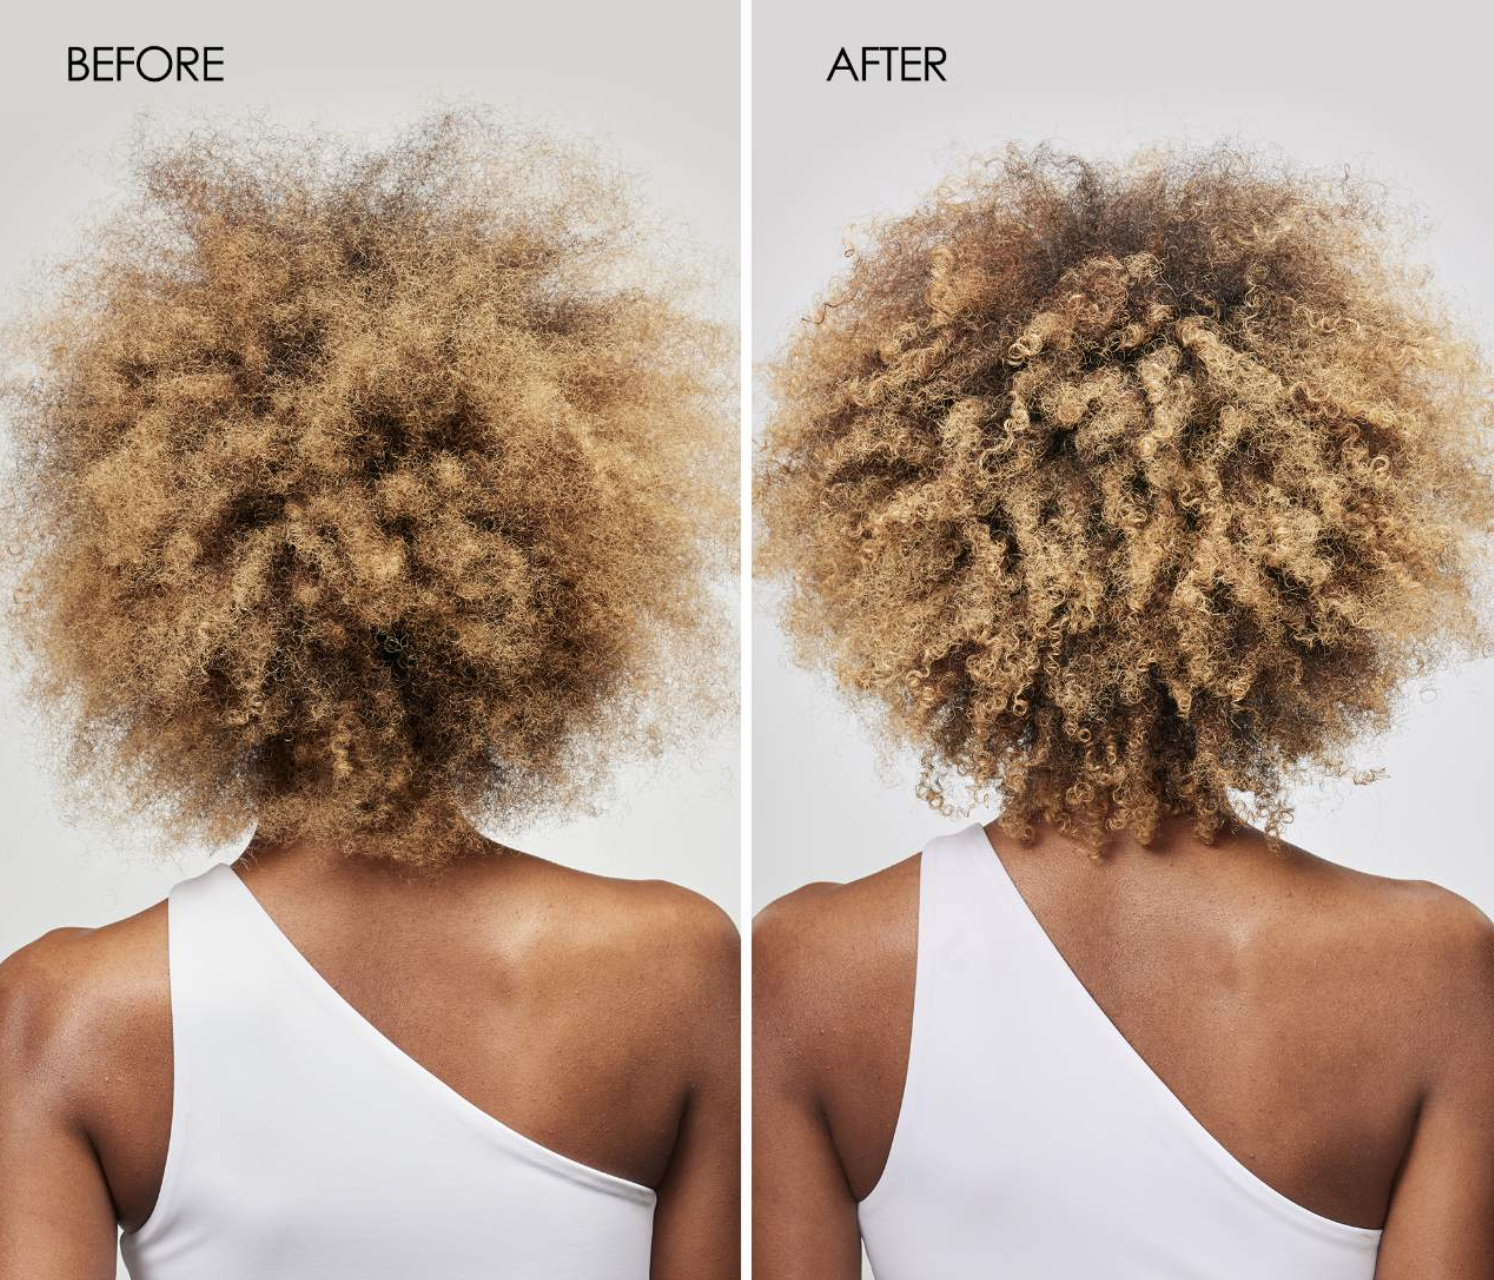 Before and after comparison of hair treatment, showing a person&#x27;s head from the back with more defined curls in the after photo